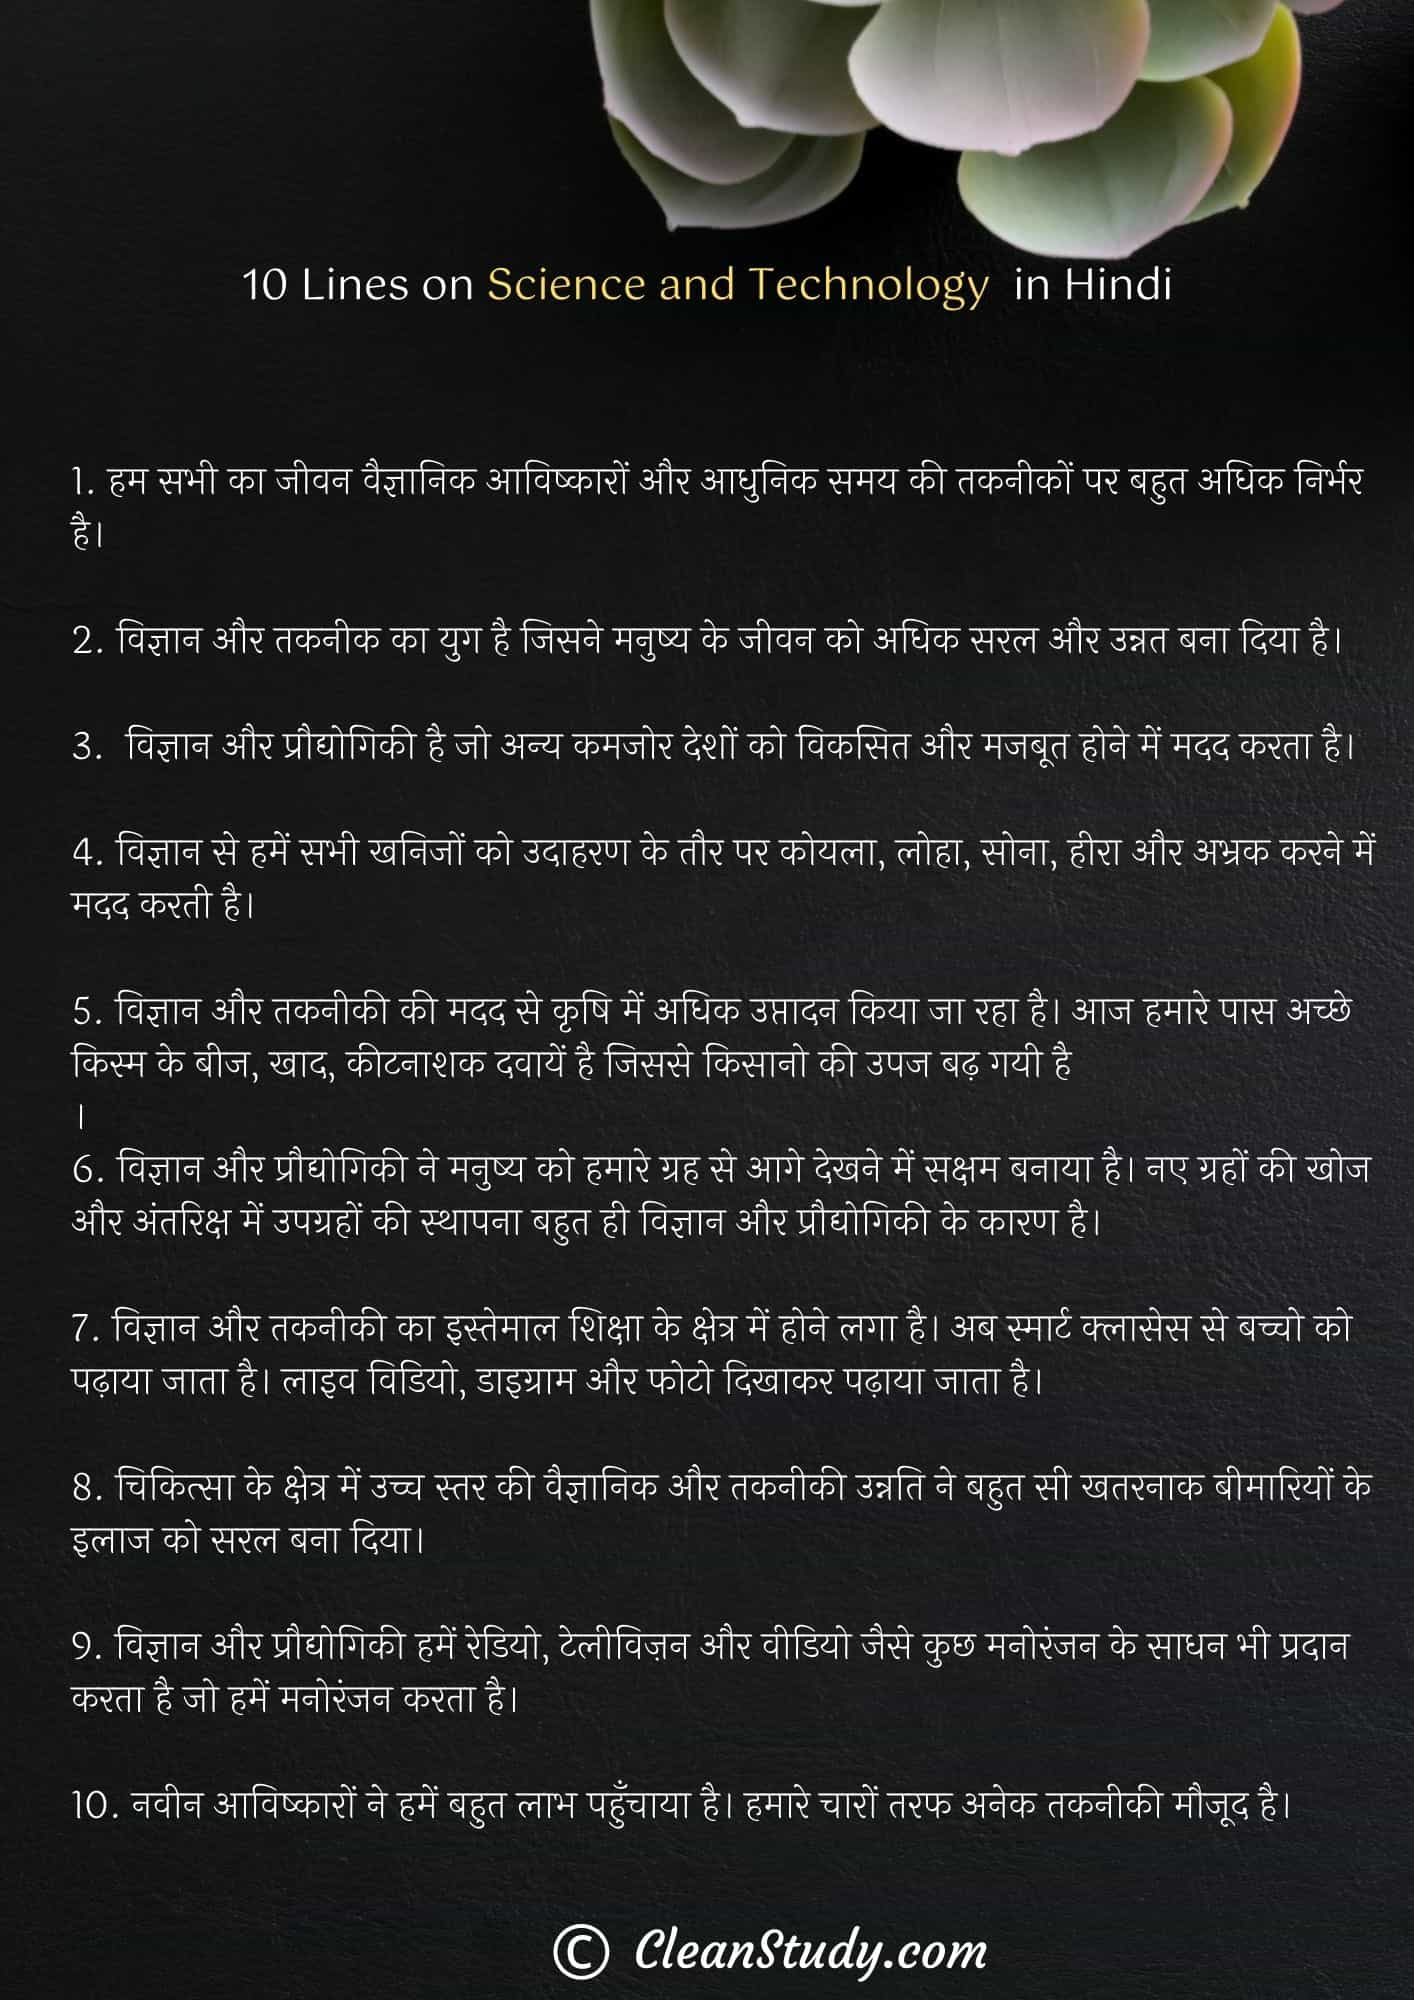 10 Lines on Science and Technology in Hindi